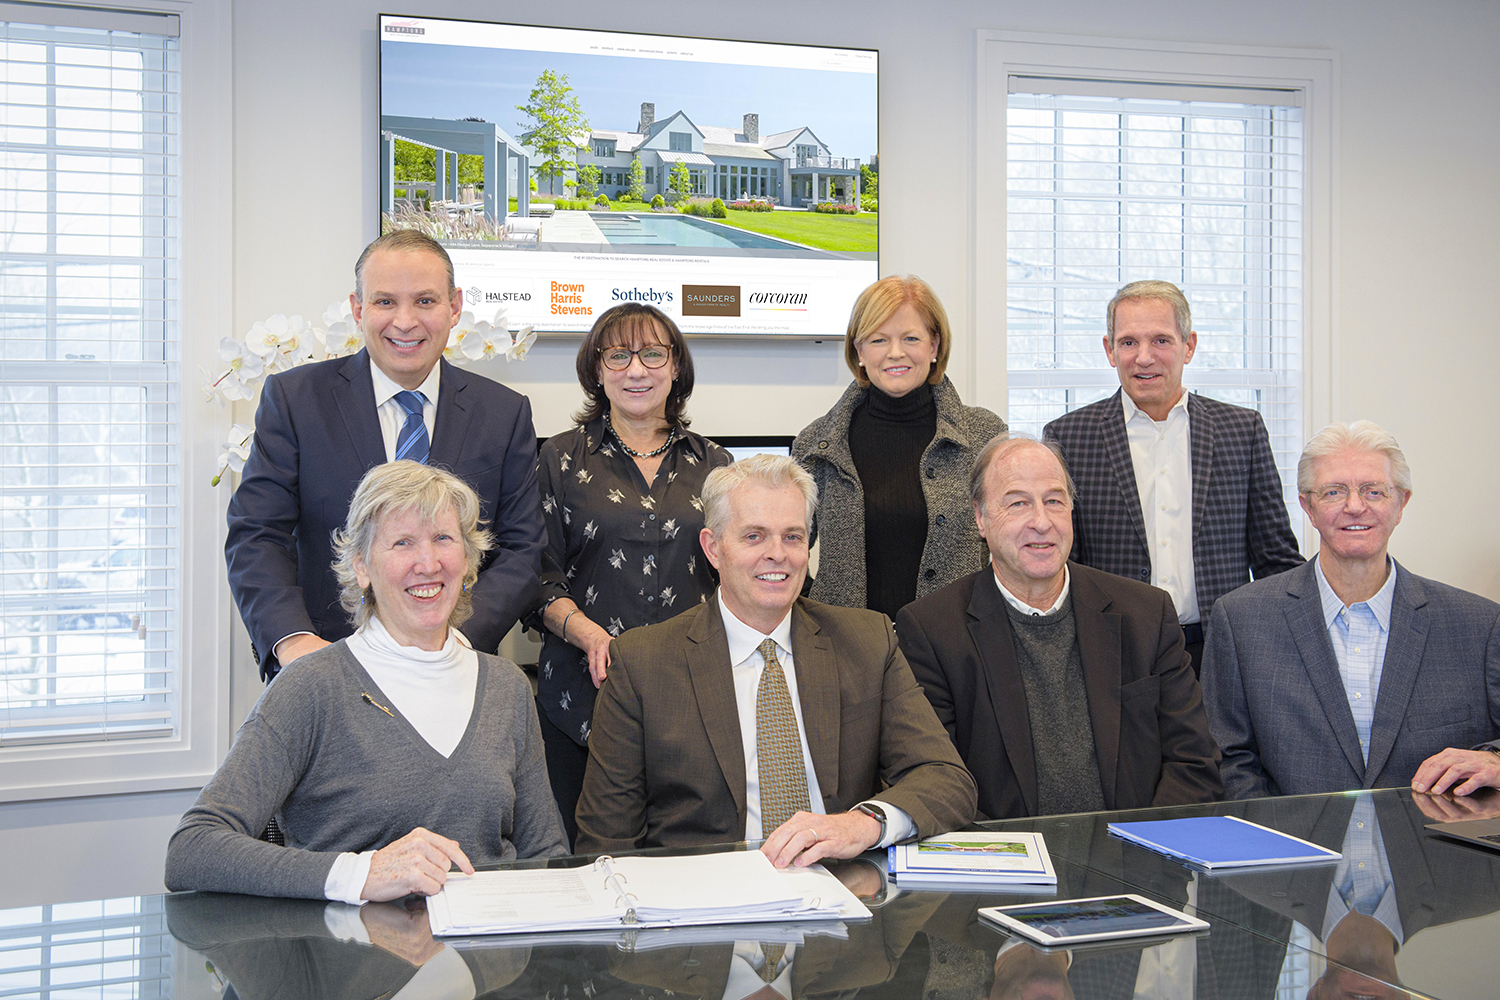 The Hamptons Real Estate Association Board, from left, seated, Andrew Saunders (Saunders & Associates), Cia Comnas (Brown Harris Stevens), Nanette Hansen (Sothebys), Ernie Cervi (Corcoran), standing, Theresa Quigley (Saunders & Associates), Robert Nelson (Brown Harris Stevens), Ed Reale (Sothebys), Marty Gleason (Corcoran).